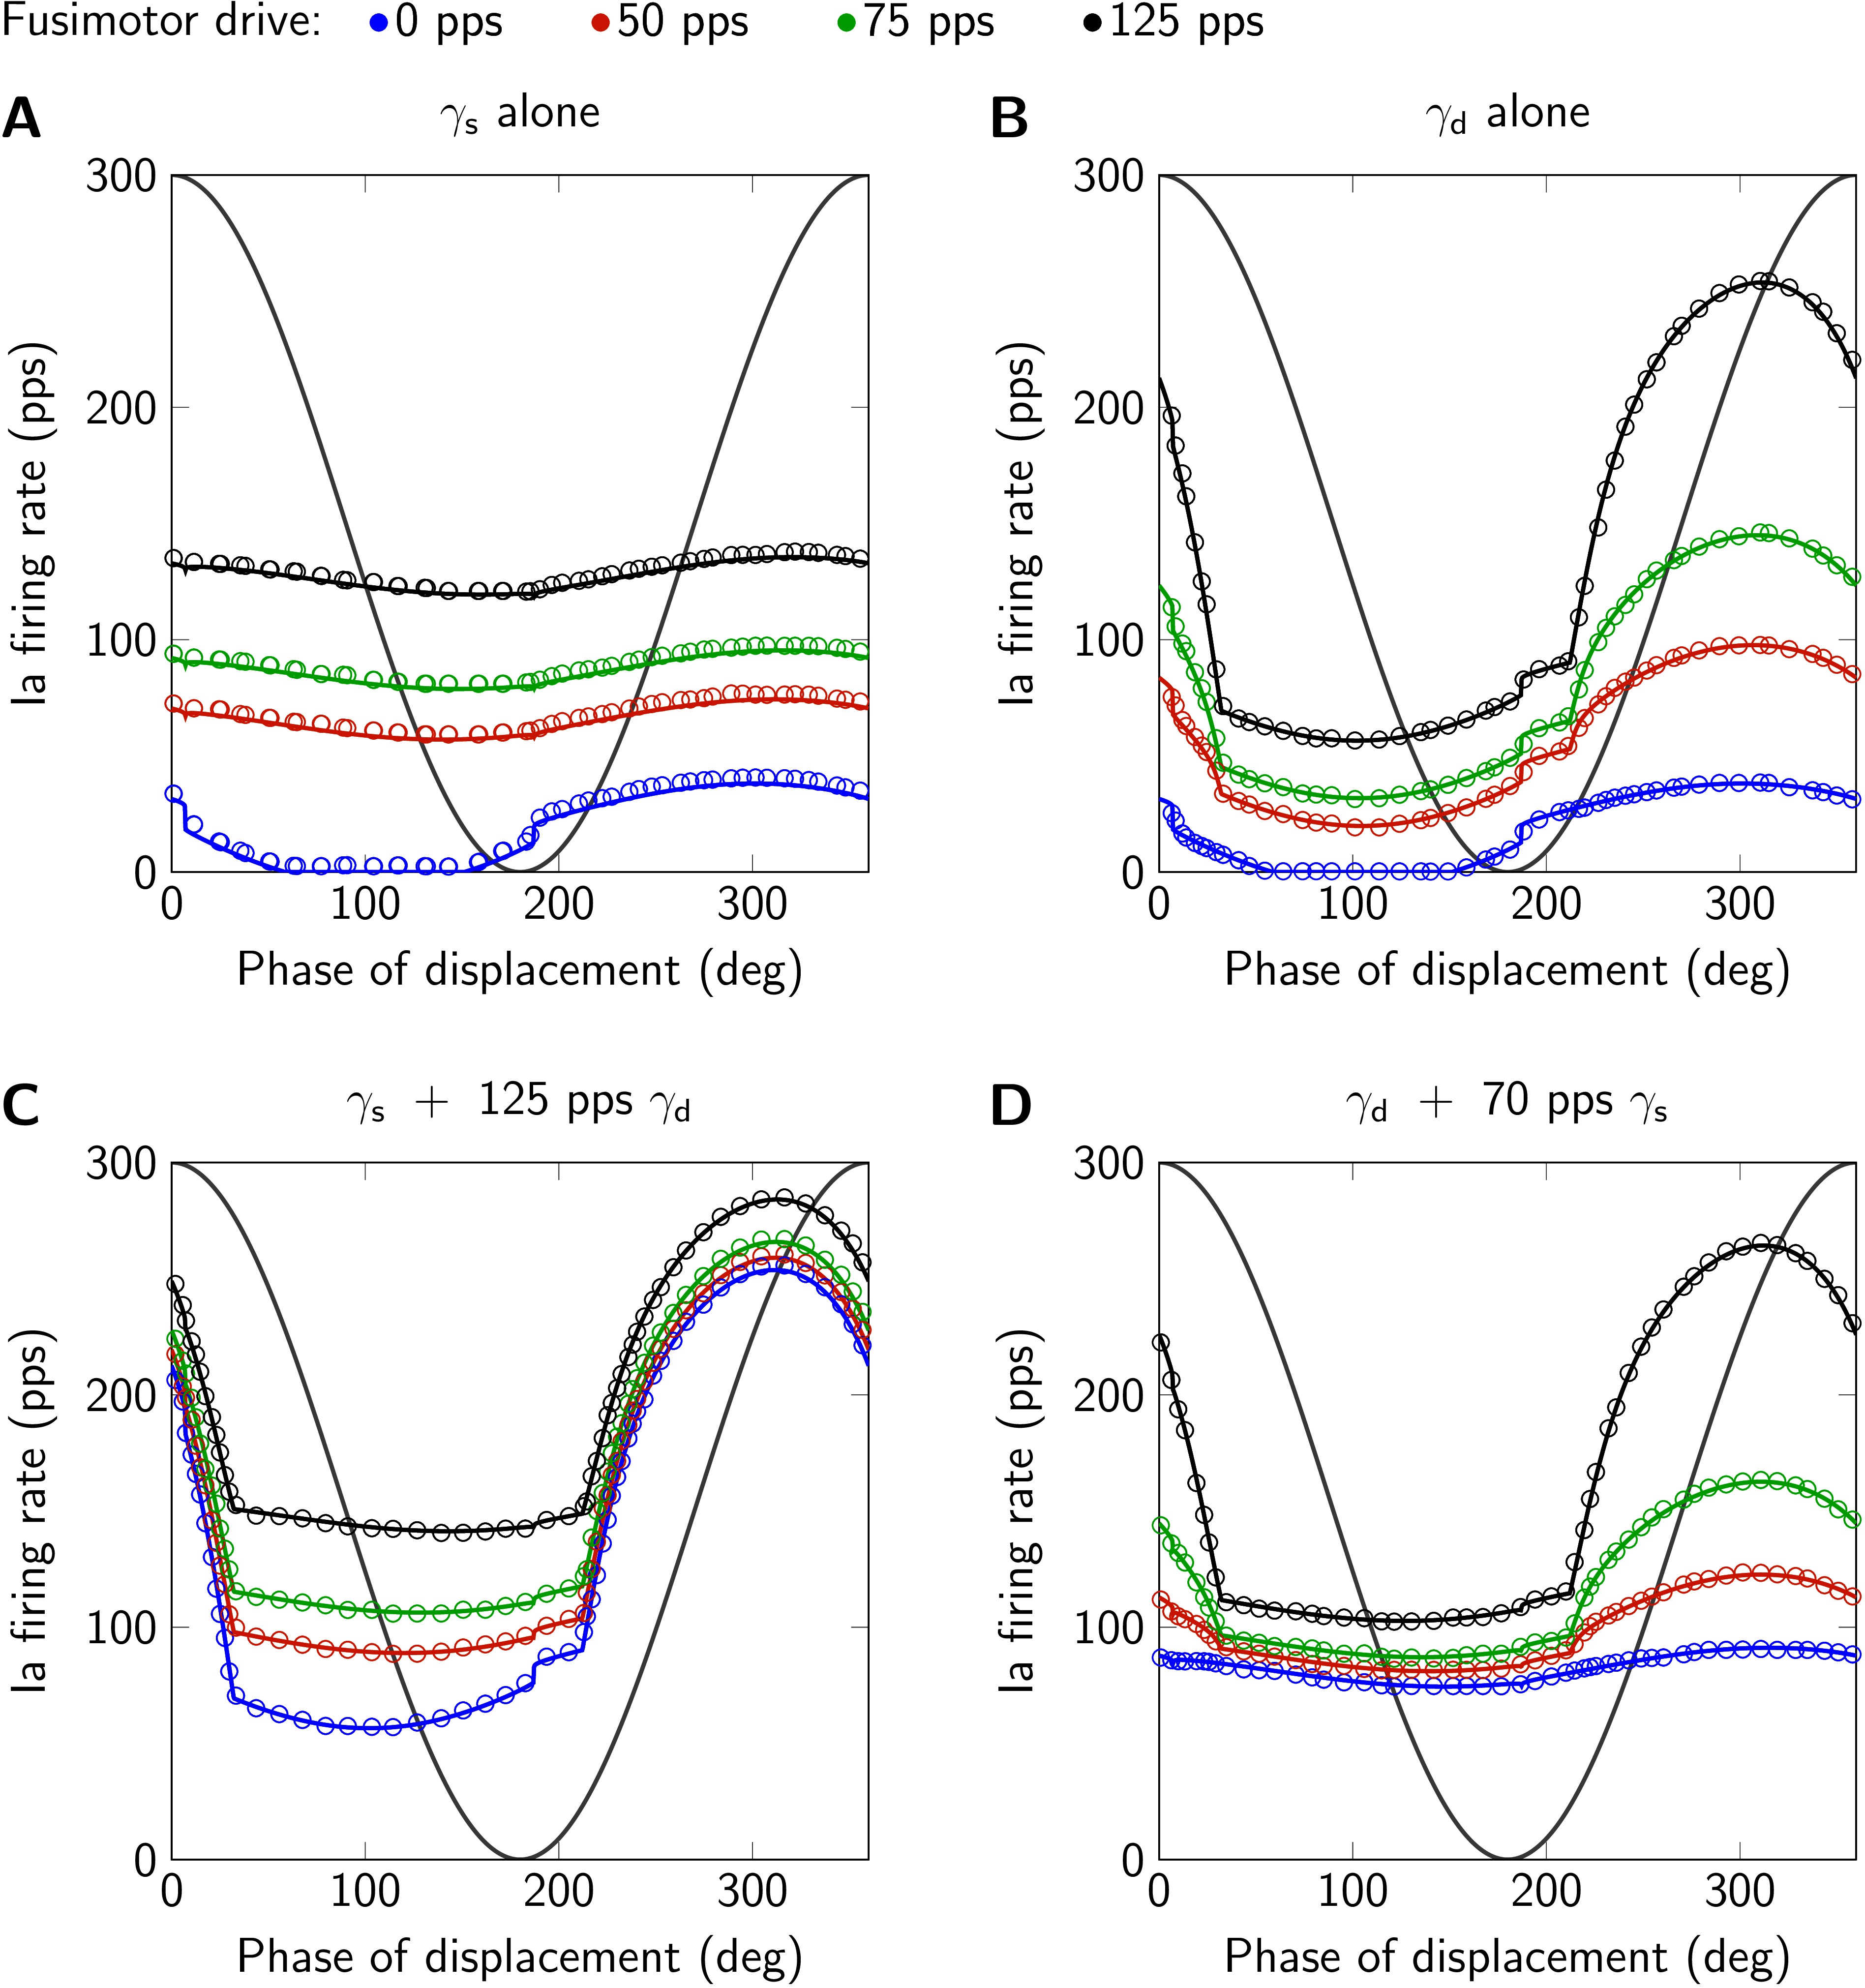 Model responses (solid lines) to sinusoidal stretch and results from , their Fig. 5 (circles). The displacement is qualitatively shown in gray (1.4 mm peak-to-peak sinusoidal stretch, mean displacement 4 mm, frequency 1 Hz, second of two cycles). A: only static fusimotor drive (\gamma_\mathrm{s}). B: only dynamic fusimotor drive (\gamma_\mathrm{d}). C: static fusimotor drive against a tonic background of dynamic fusimotor drive. D: dynamic fusimotor drive against a tonic background of static fusimotor drive. Ia firing rate and fusimotor drive are given in pulses per second (pps). This figure is created by running Fig02.m.